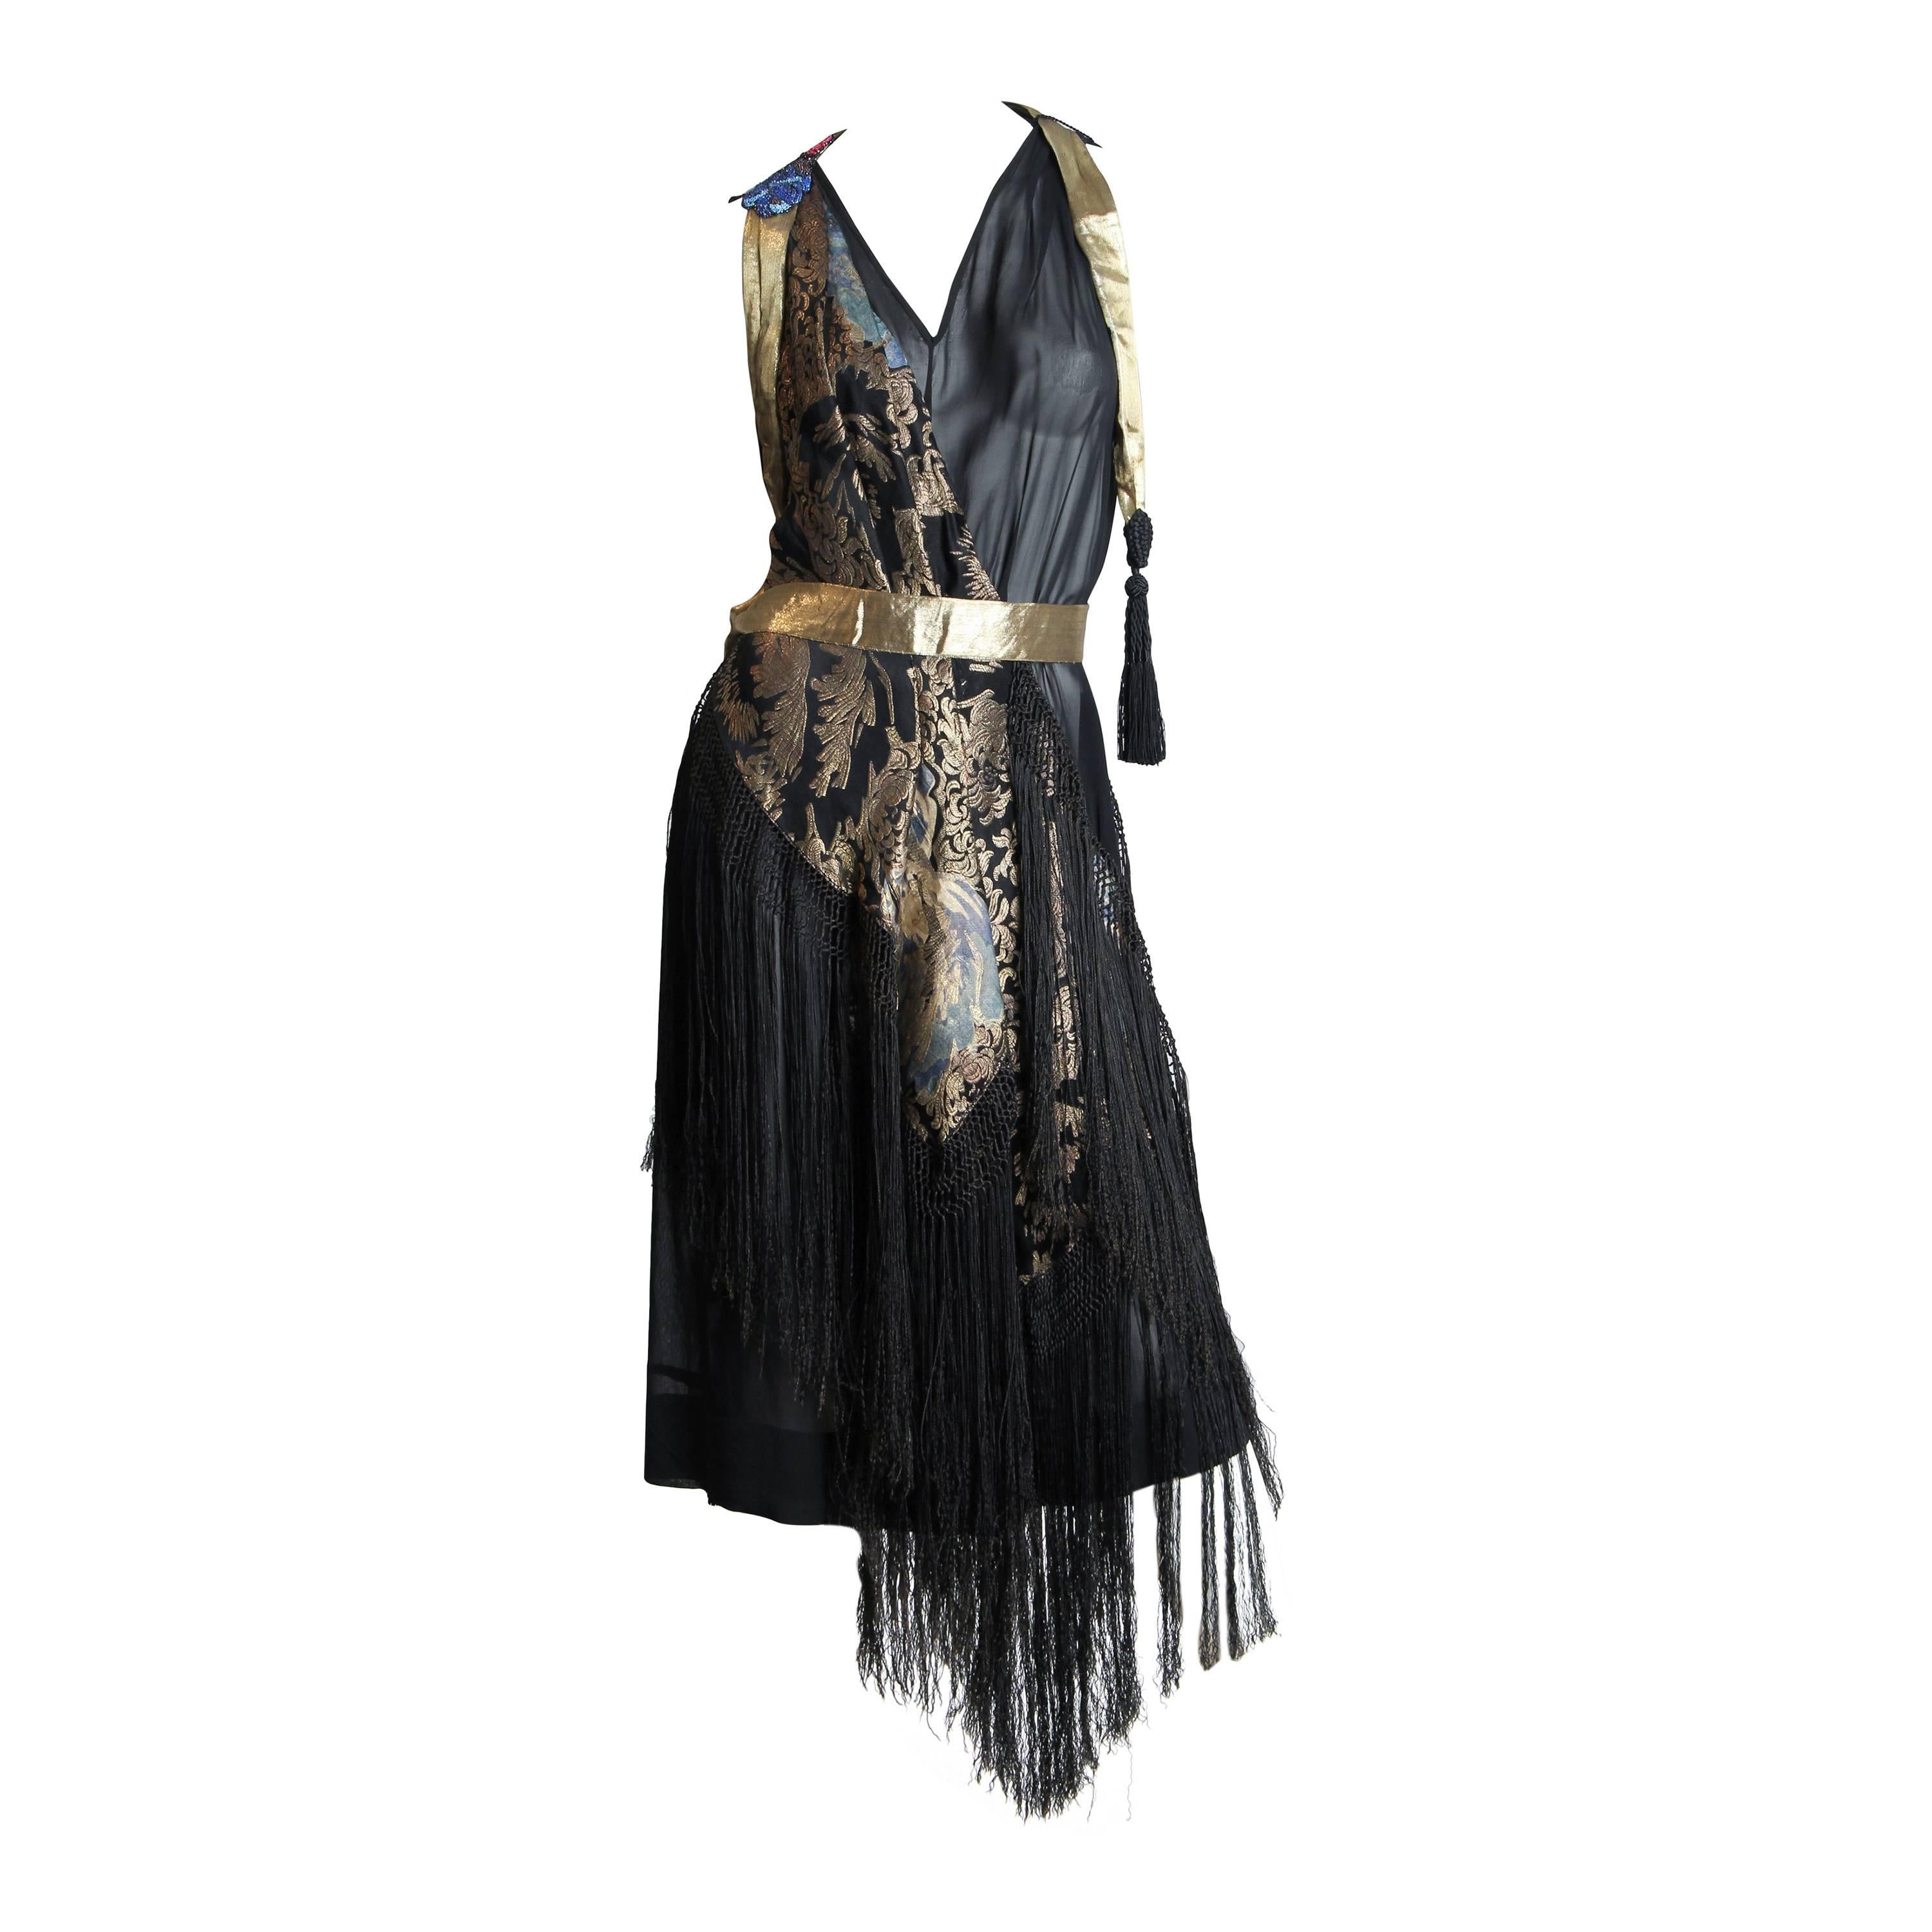 1920s Asymmetrical Dress with Beads, Lamé and Fringe